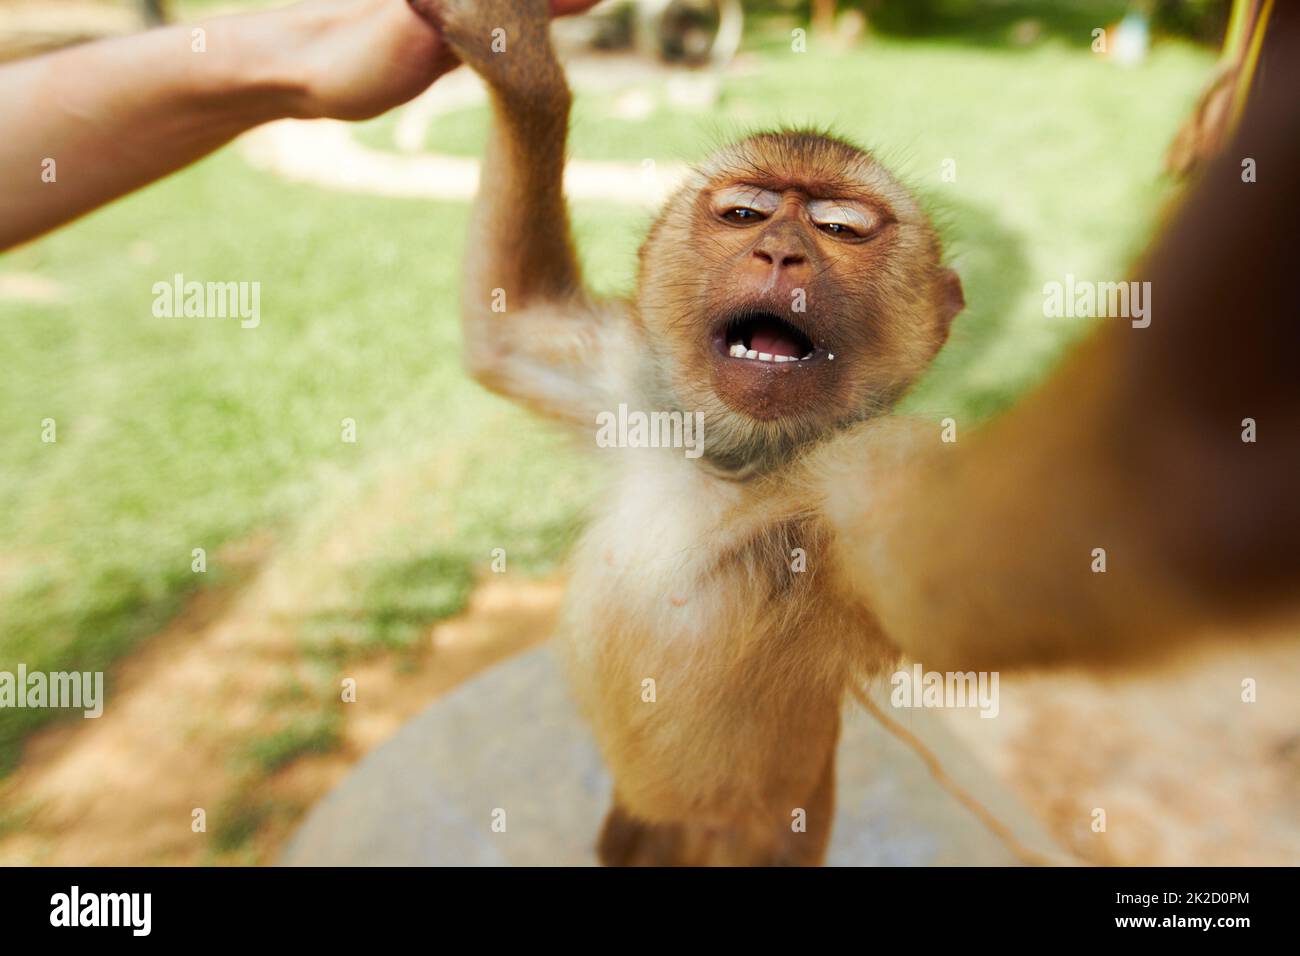 Thai monkey reaching. A macaque monkey in thailand and reaching towards the camera. Stock Photo